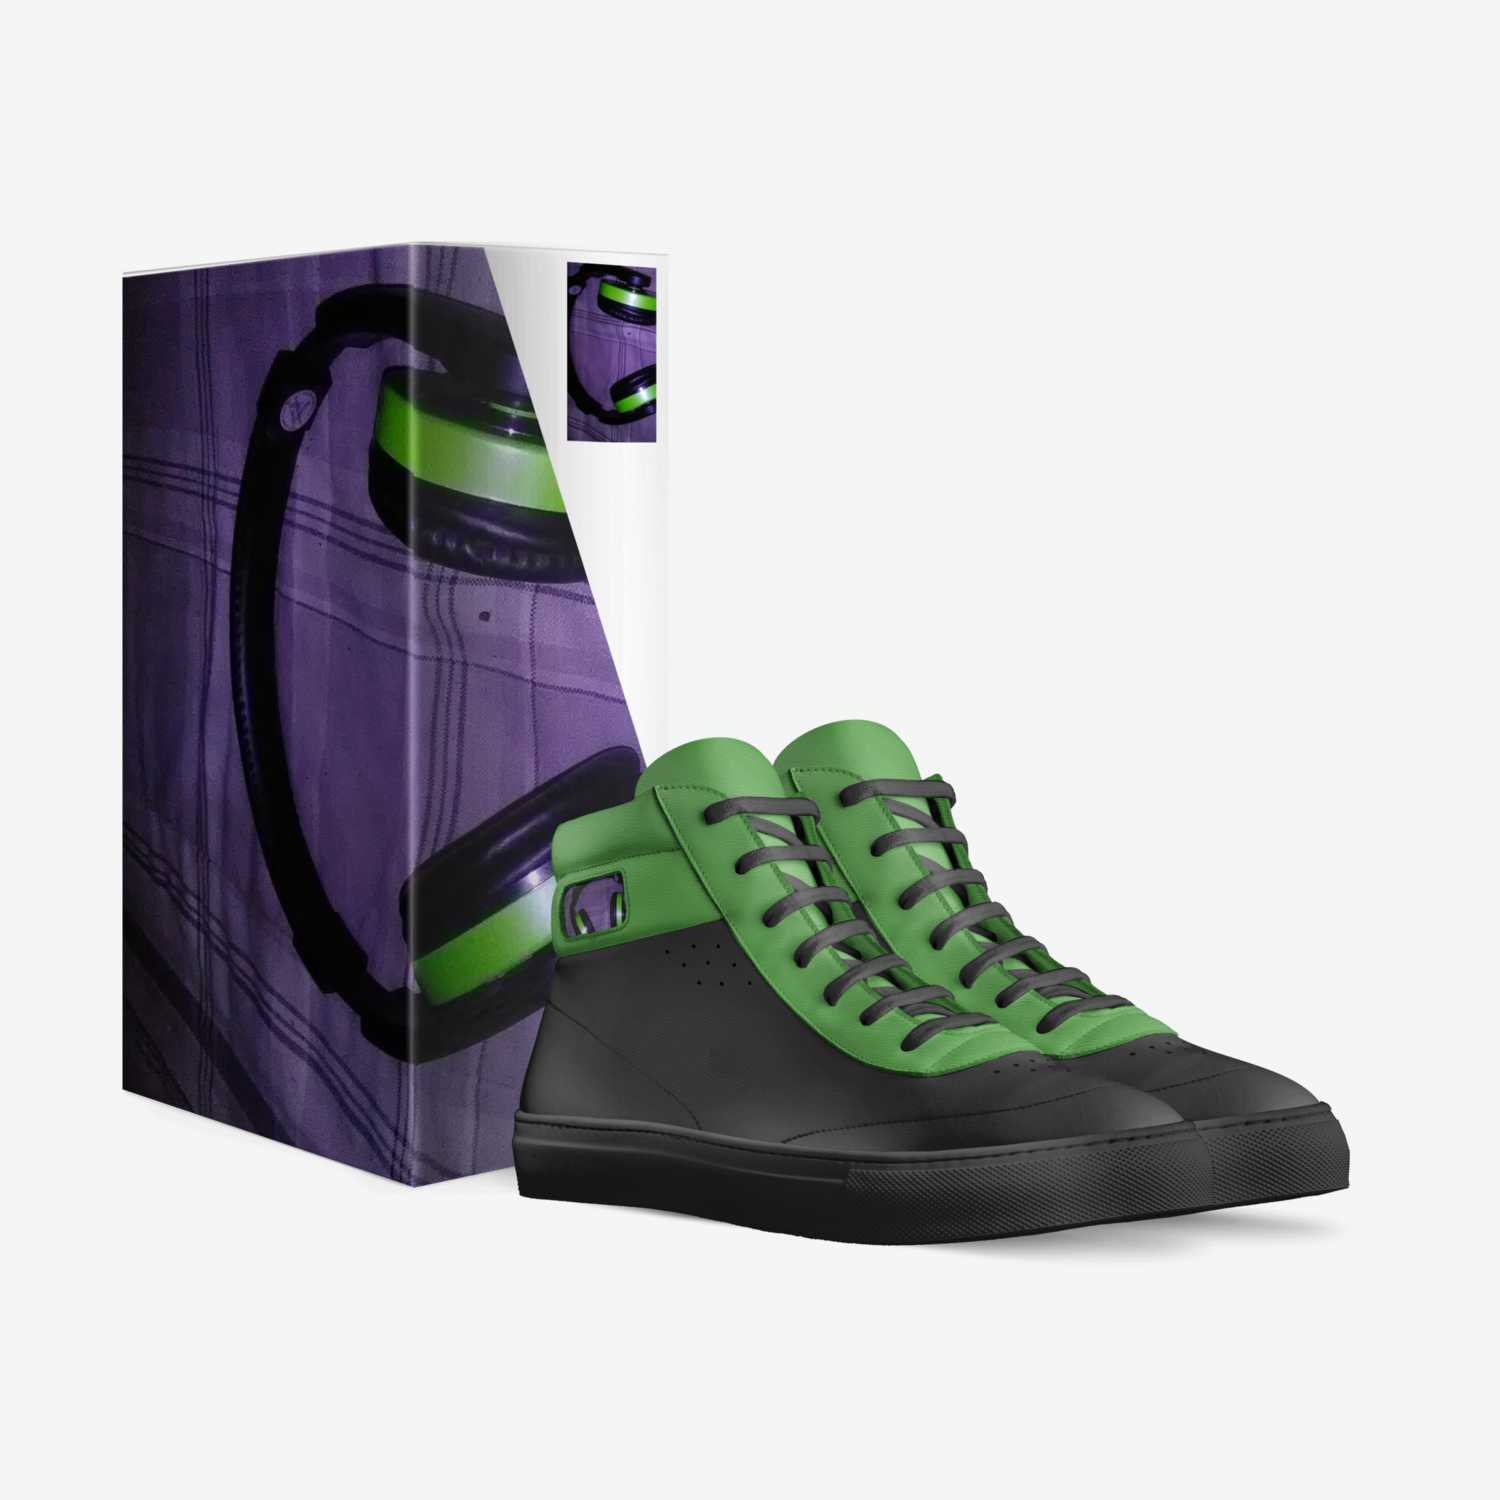 Black&green custom made in Italy shoes by Charles Russaw | Box view